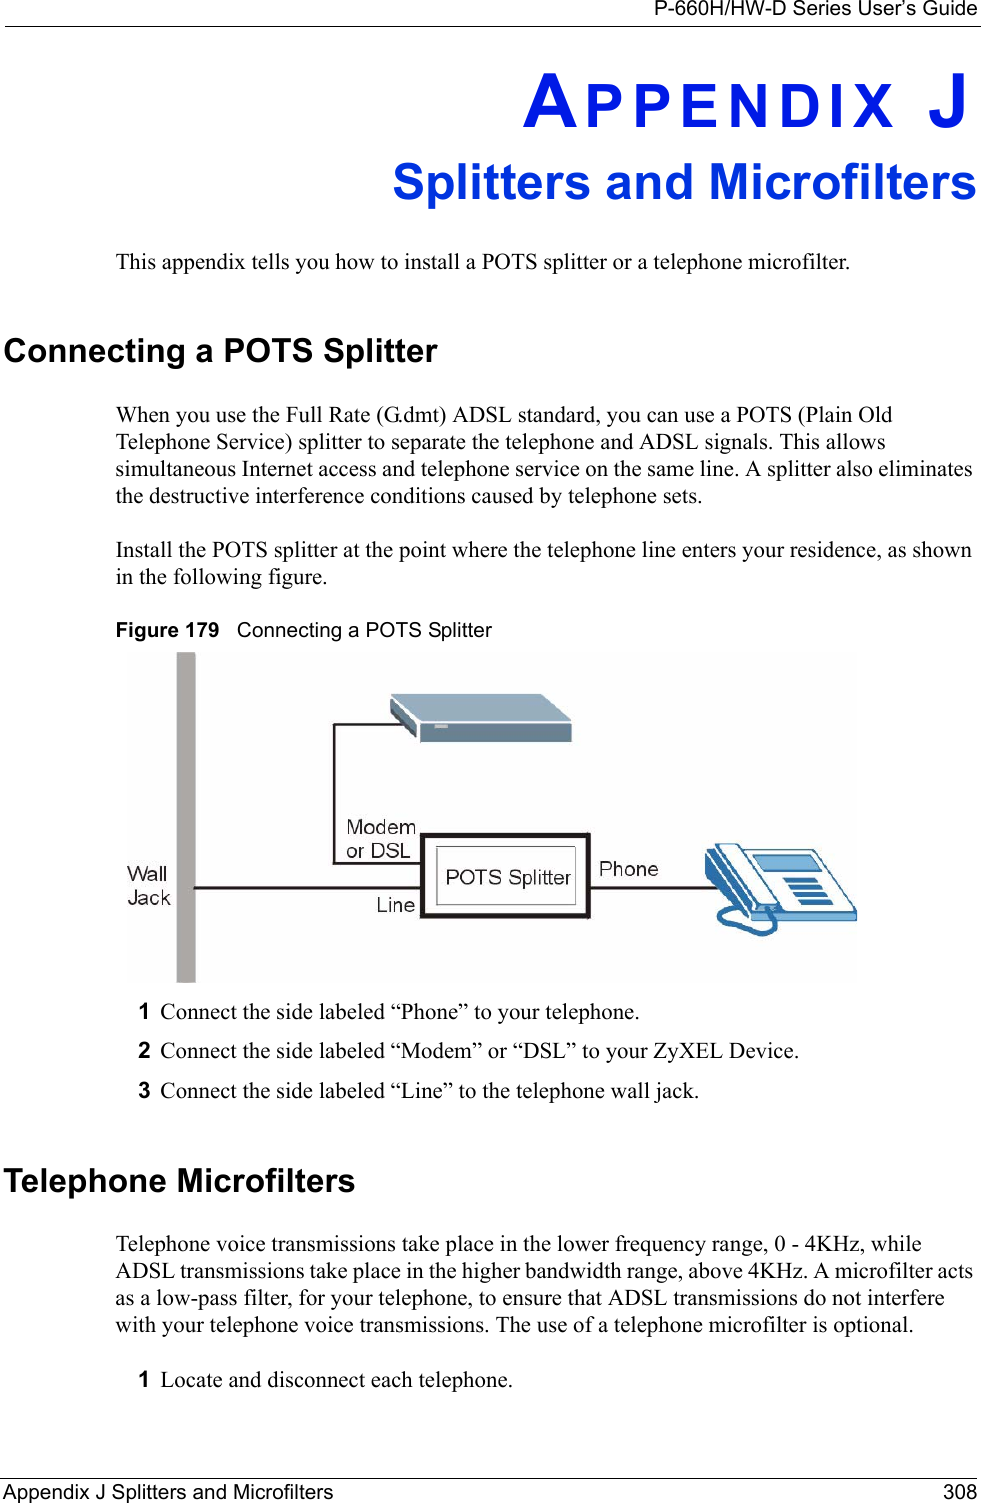 P-660H/HW-D Series User’s GuideAppendix J Splitters and Microfilters 308APPENDIX JSplitters and MicrofiltersThis appendix tells you how to install a POTS splitter or a telephone microfilter.Connecting a POTS SplitterWhen you use the Full Rate (G.dmt) ADSL standard, you can use a POTS (Plain Old Telephone Service) splitter to separate the telephone and ADSL signals. This allows simultaneous Internet access and telephone service on the same line. A splitter also eliminates the destructive interference conditions caused by telephone sets. Install the POTS splitter at the point where the telephone line enters your residence, as shown in the following figure.Figure 179   Connecting a POTS Splitter1Connect the side labeled “Phone” to your telephone.2Connect the side labeled “Modem” or “DSL” to your ZyXEL Device.3Connect the side labeled “Line” to the telephone wall jack.Telephone MicrofiltersTelephone voice transmissions take place in the lower frequency range, 0 - 4KHz, while ADSL transmissions take place in the higher bandwidth range, above 4KHz. A microfilter acts as a low-pass filter, for your telephone, to ensure that ADSL transmissions do not interfere with your telephone voice transmissions. The use of a telephone microfilter is optional. 1Locate and disconnect each telephone. 